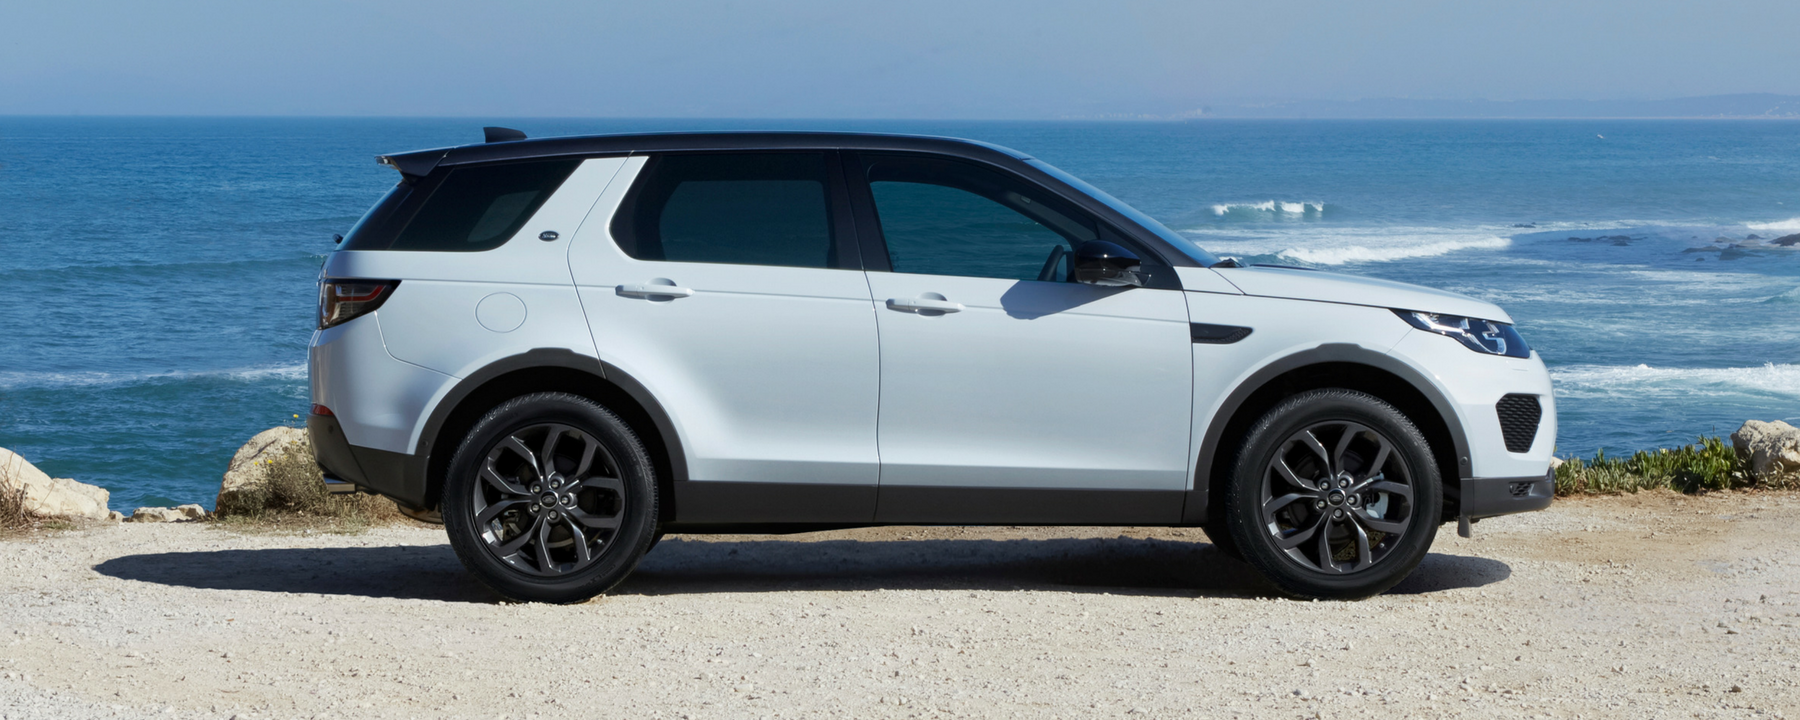 The 2018 Land Rover Discovery Sport | Land Rover West Ashley